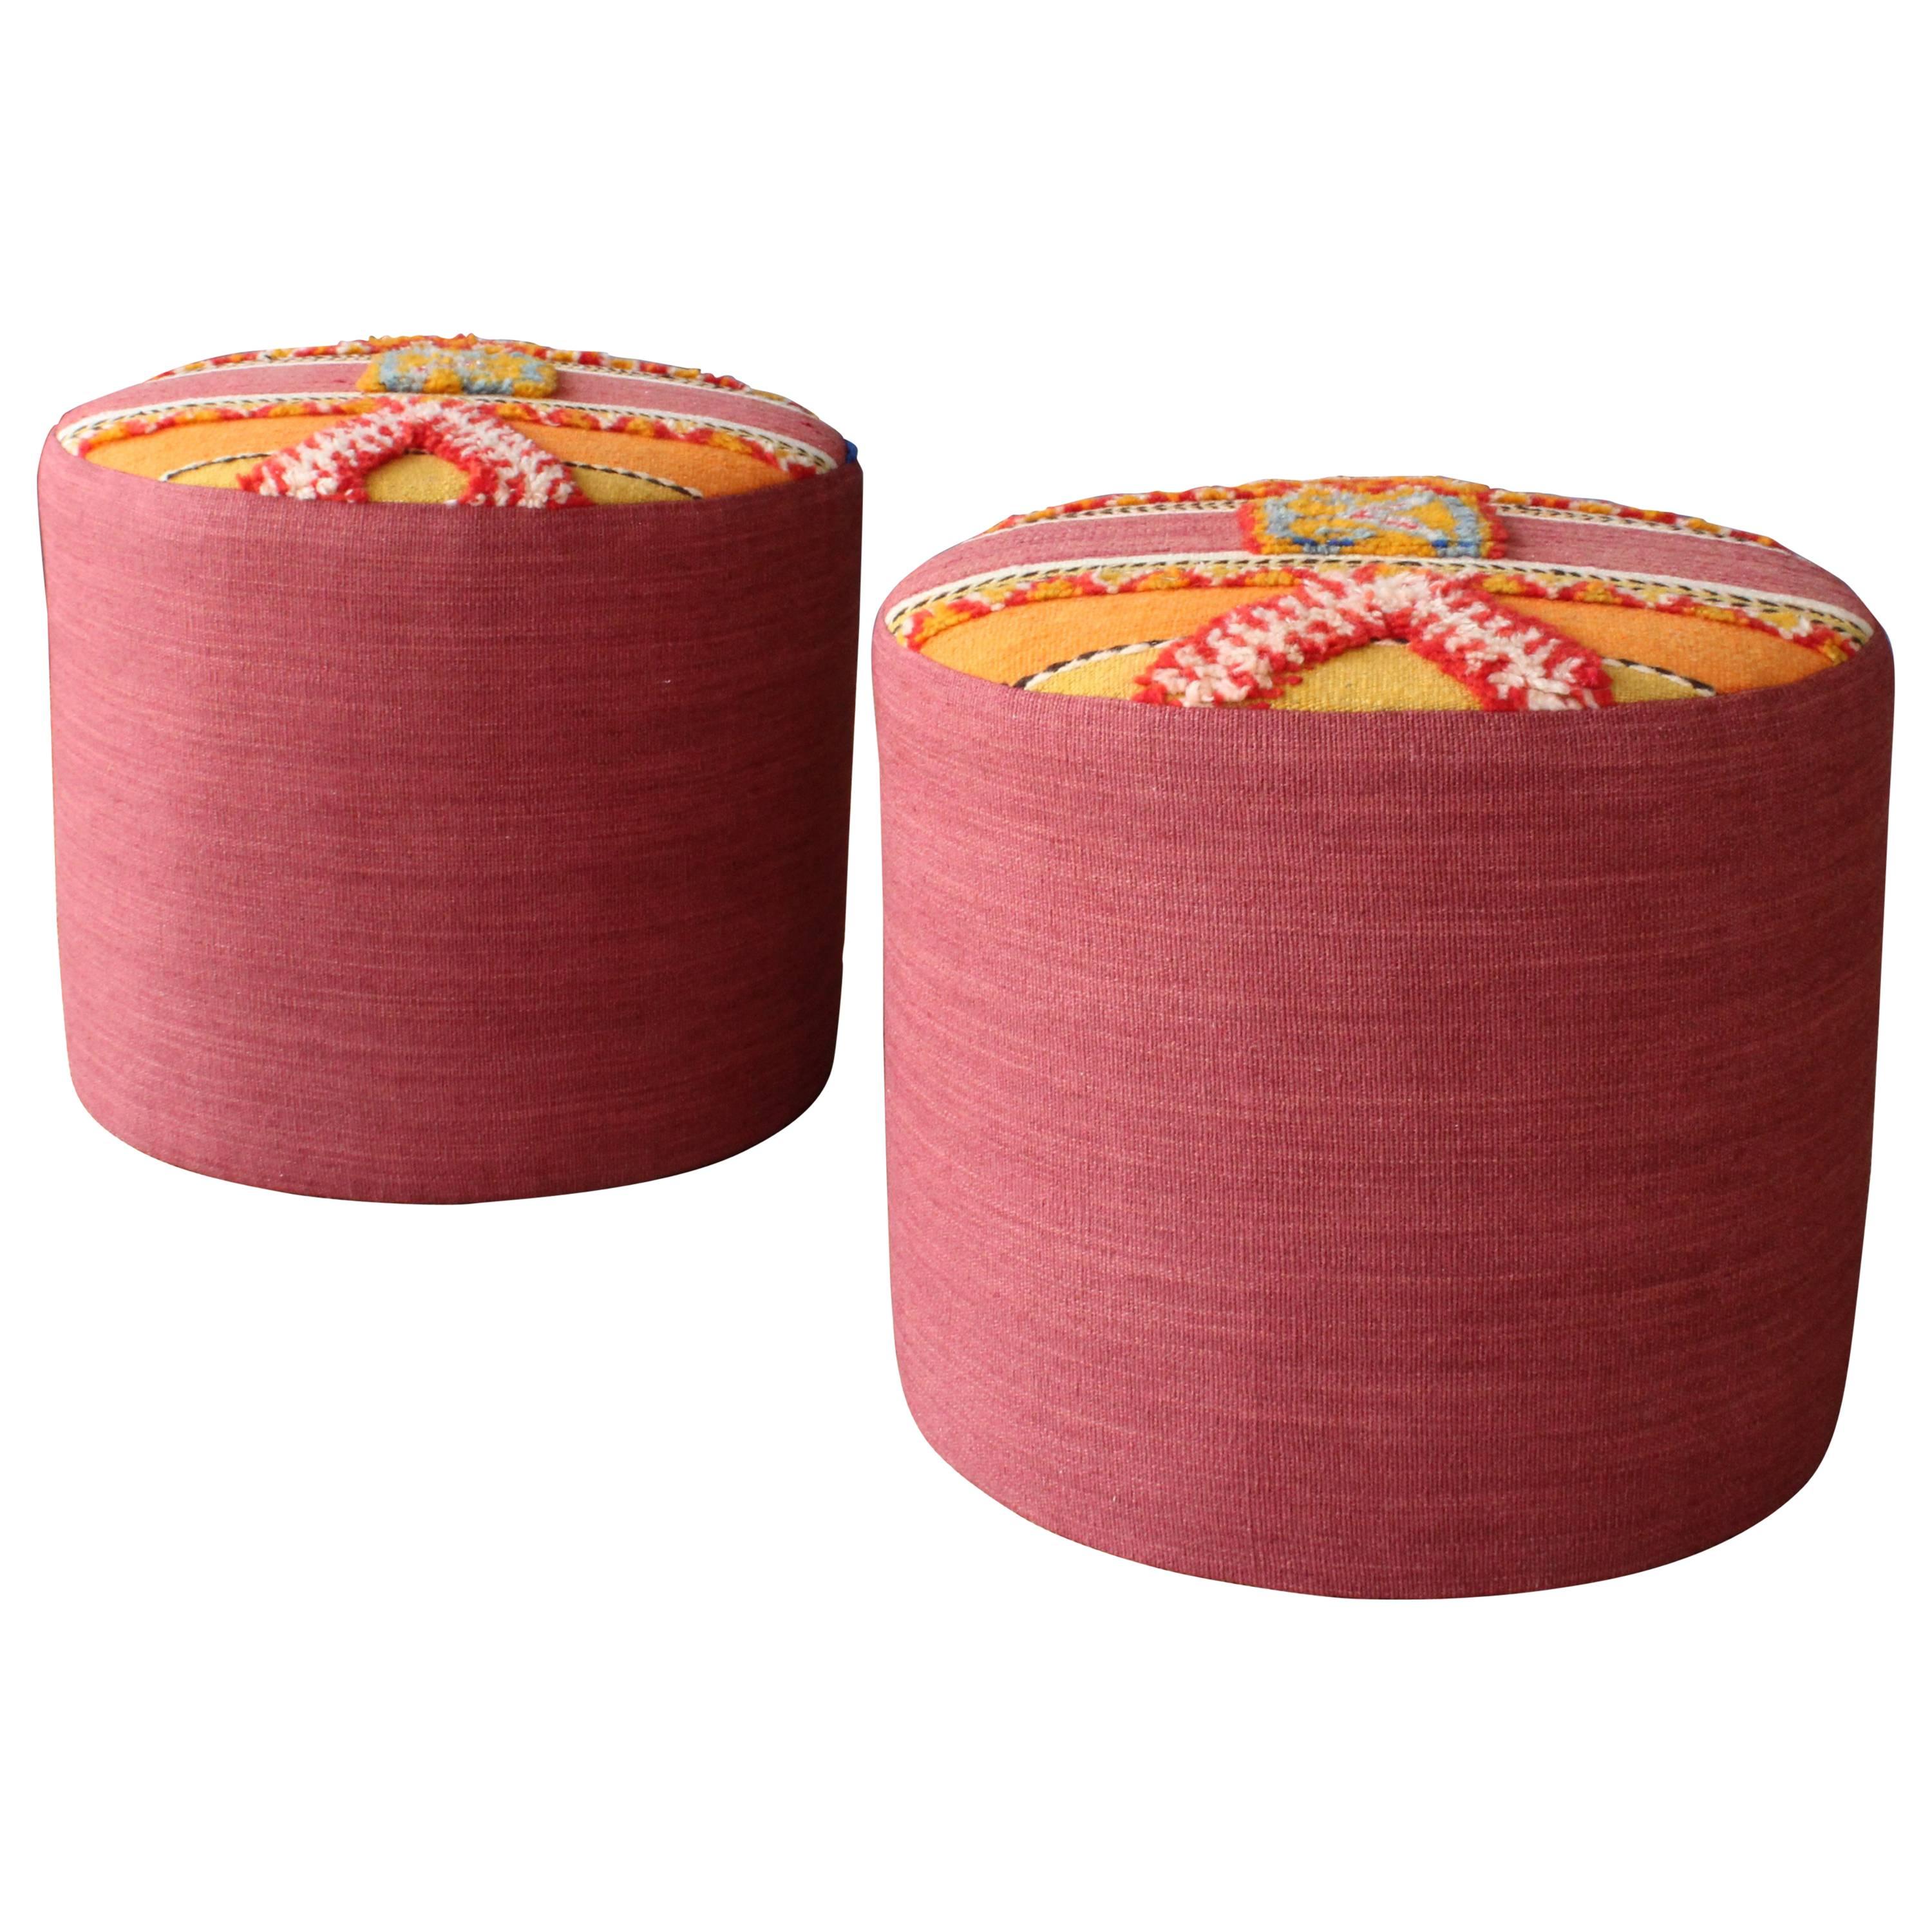 Pair of Stools with Vintage Moroccan Upholstery